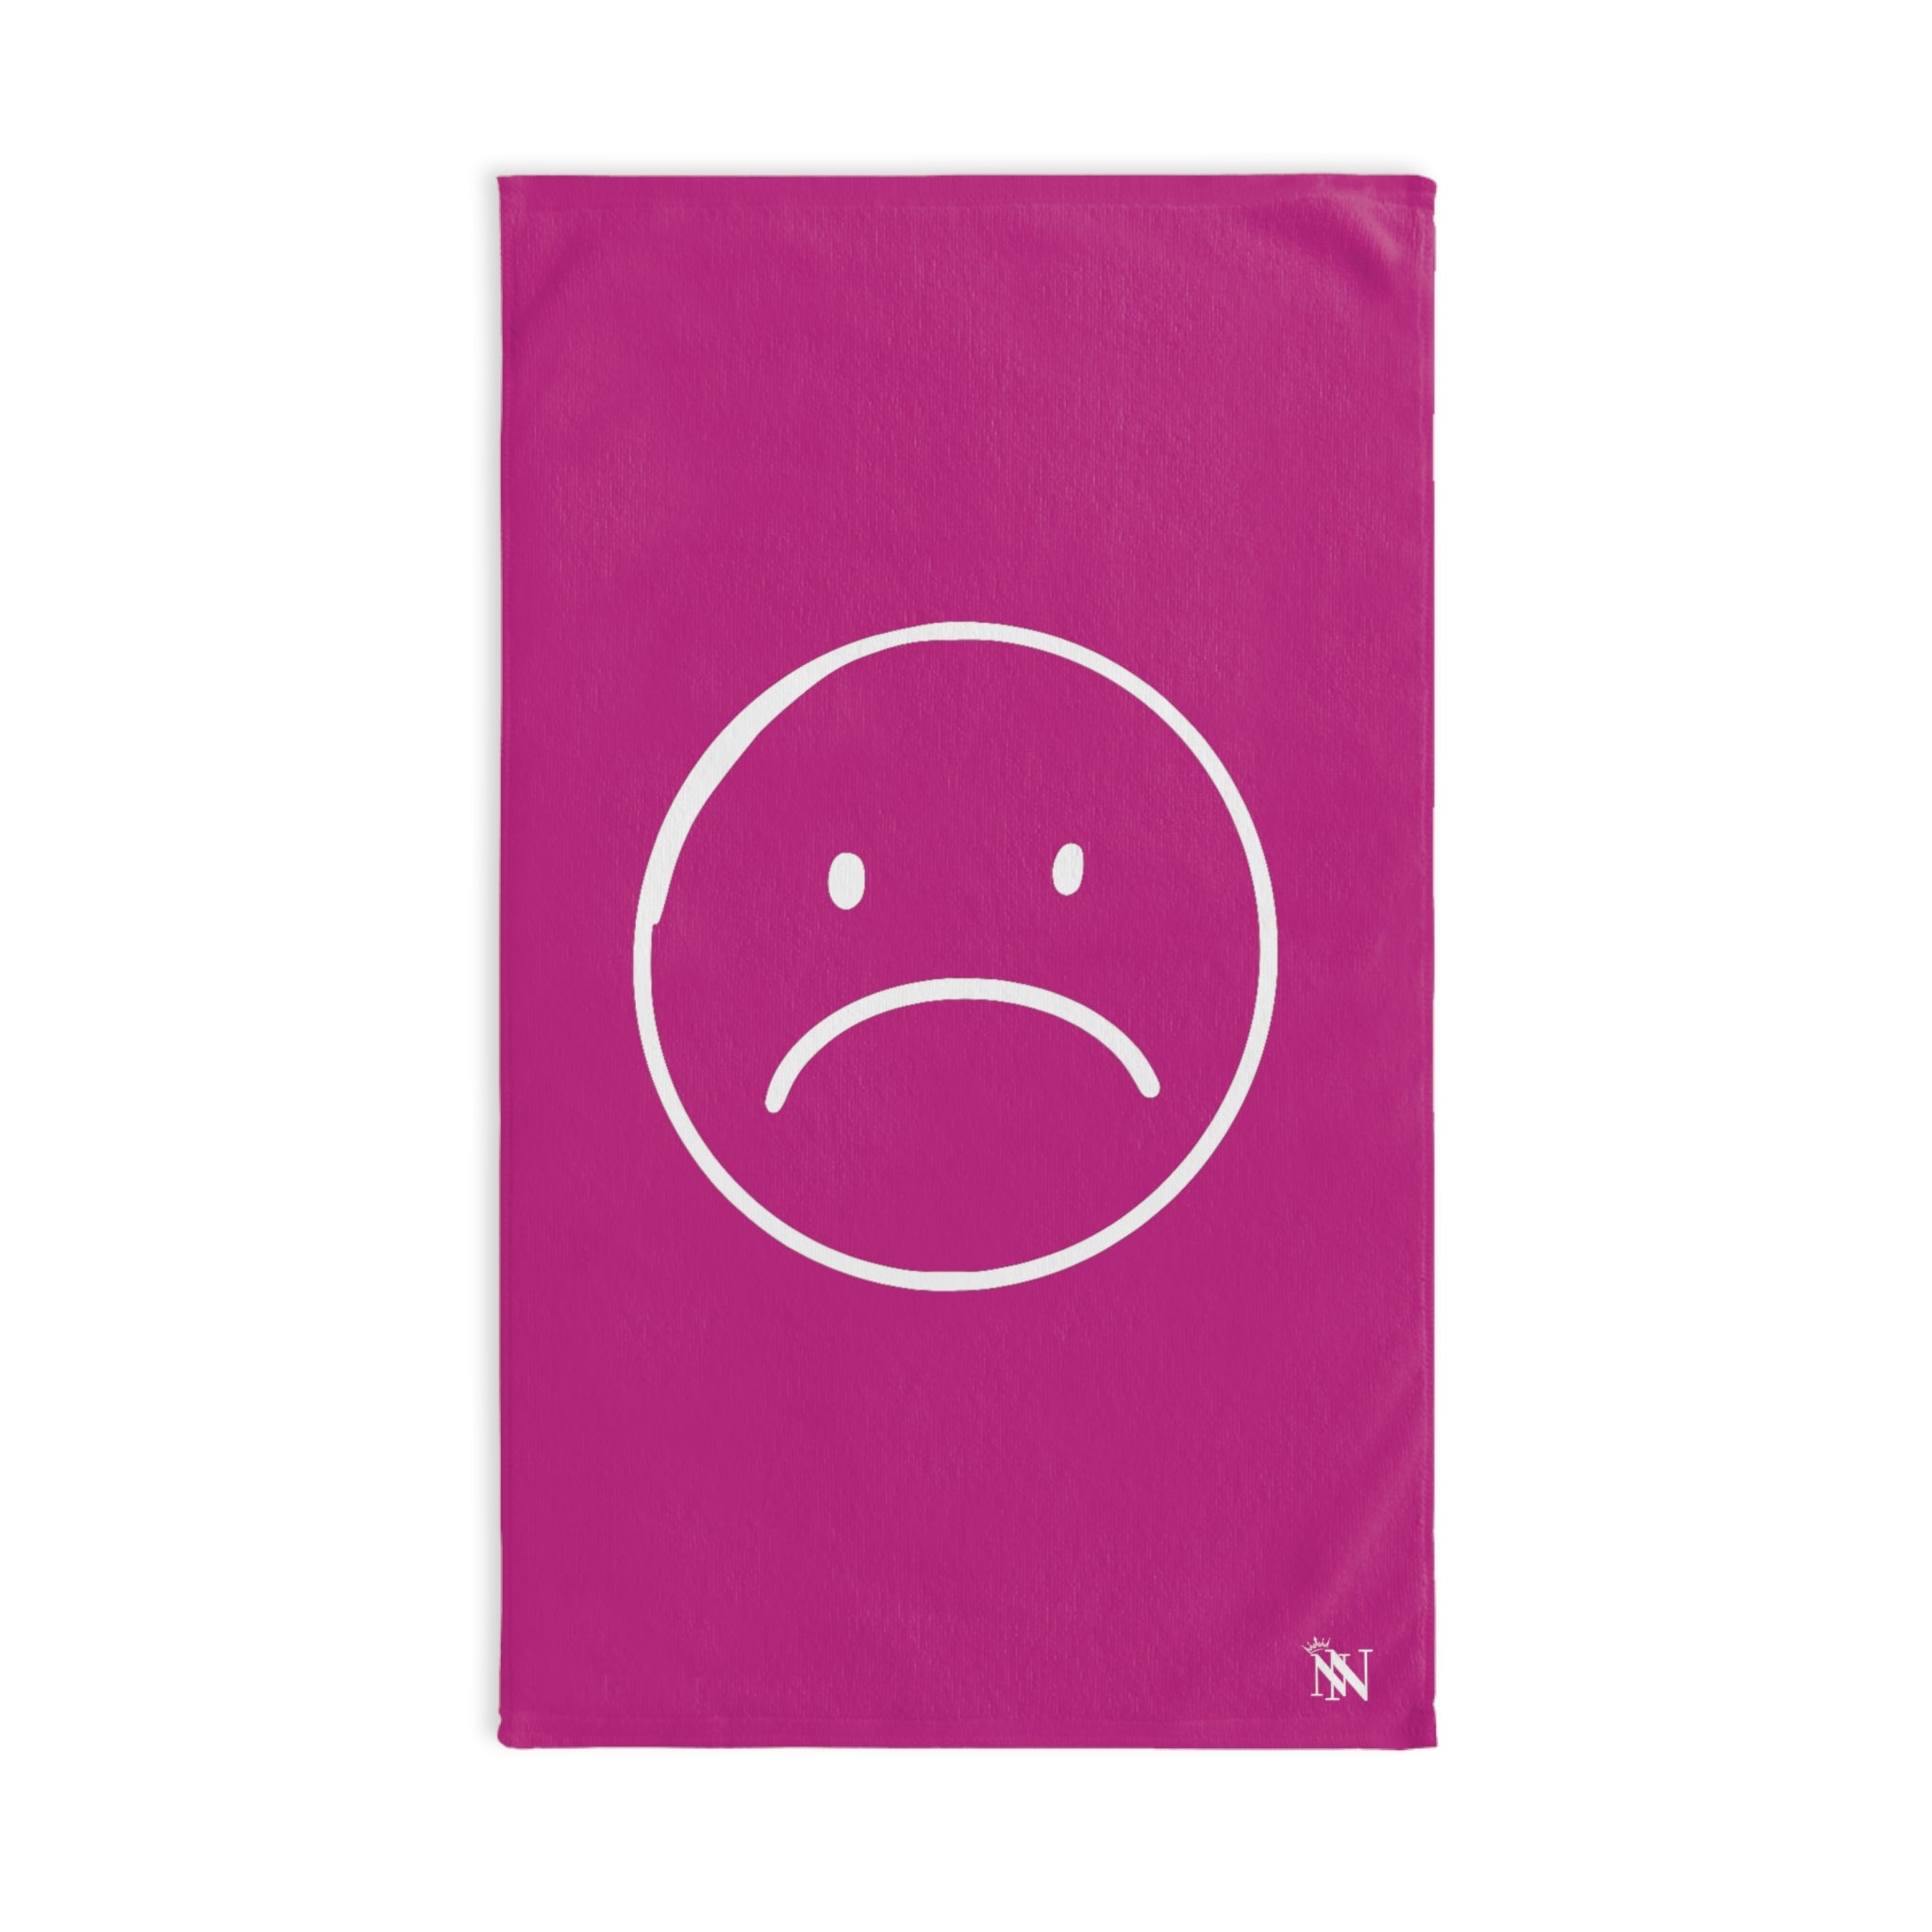 Sad Frown White Fuscia | Funny Gifts for Men - Gifts for Him - Birthday Gifts for Men, Him, Husband, Boyfriend, New Couple Gifts, Fathers & Valentines Day Gifts, Hand Towels NECTAR NAPKINS